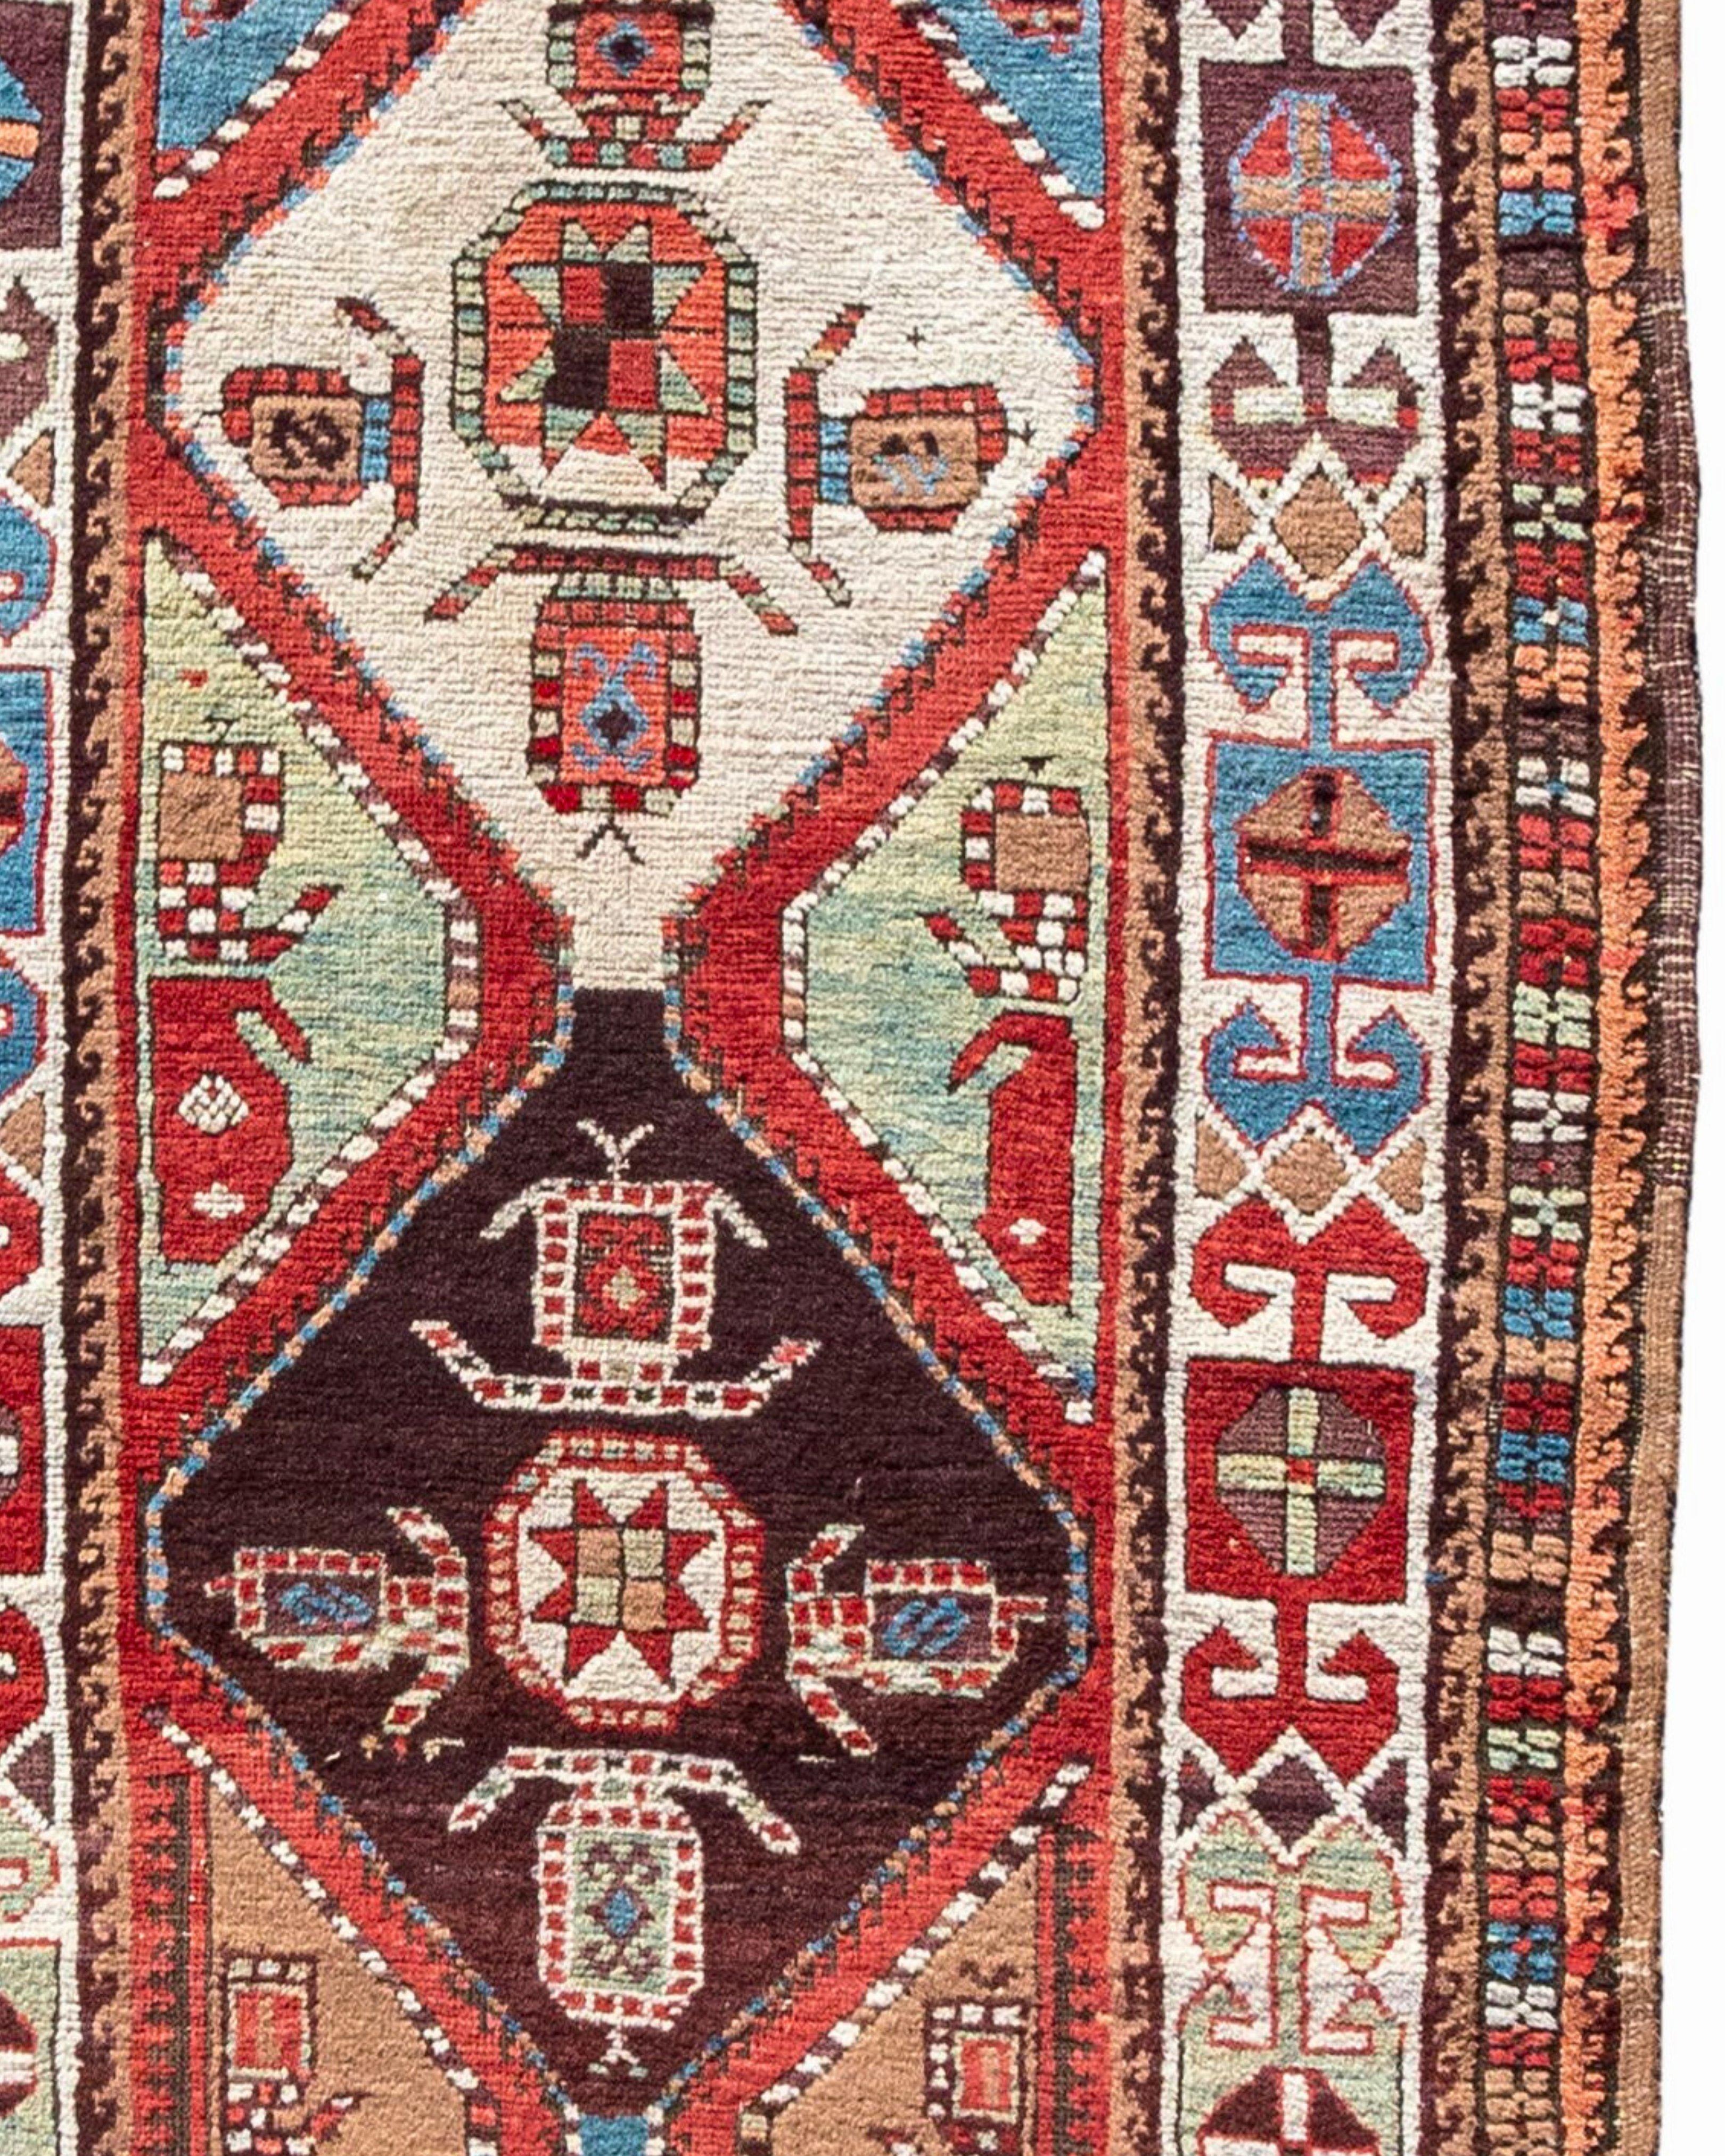 Antique Persian Serab Runner Rug, 19th Century

Wonderful use of a range of colors and authentic camel wool throughout. This style and type of rug would have preceded the more standardized runners made in the Early 20th Century.

Additional